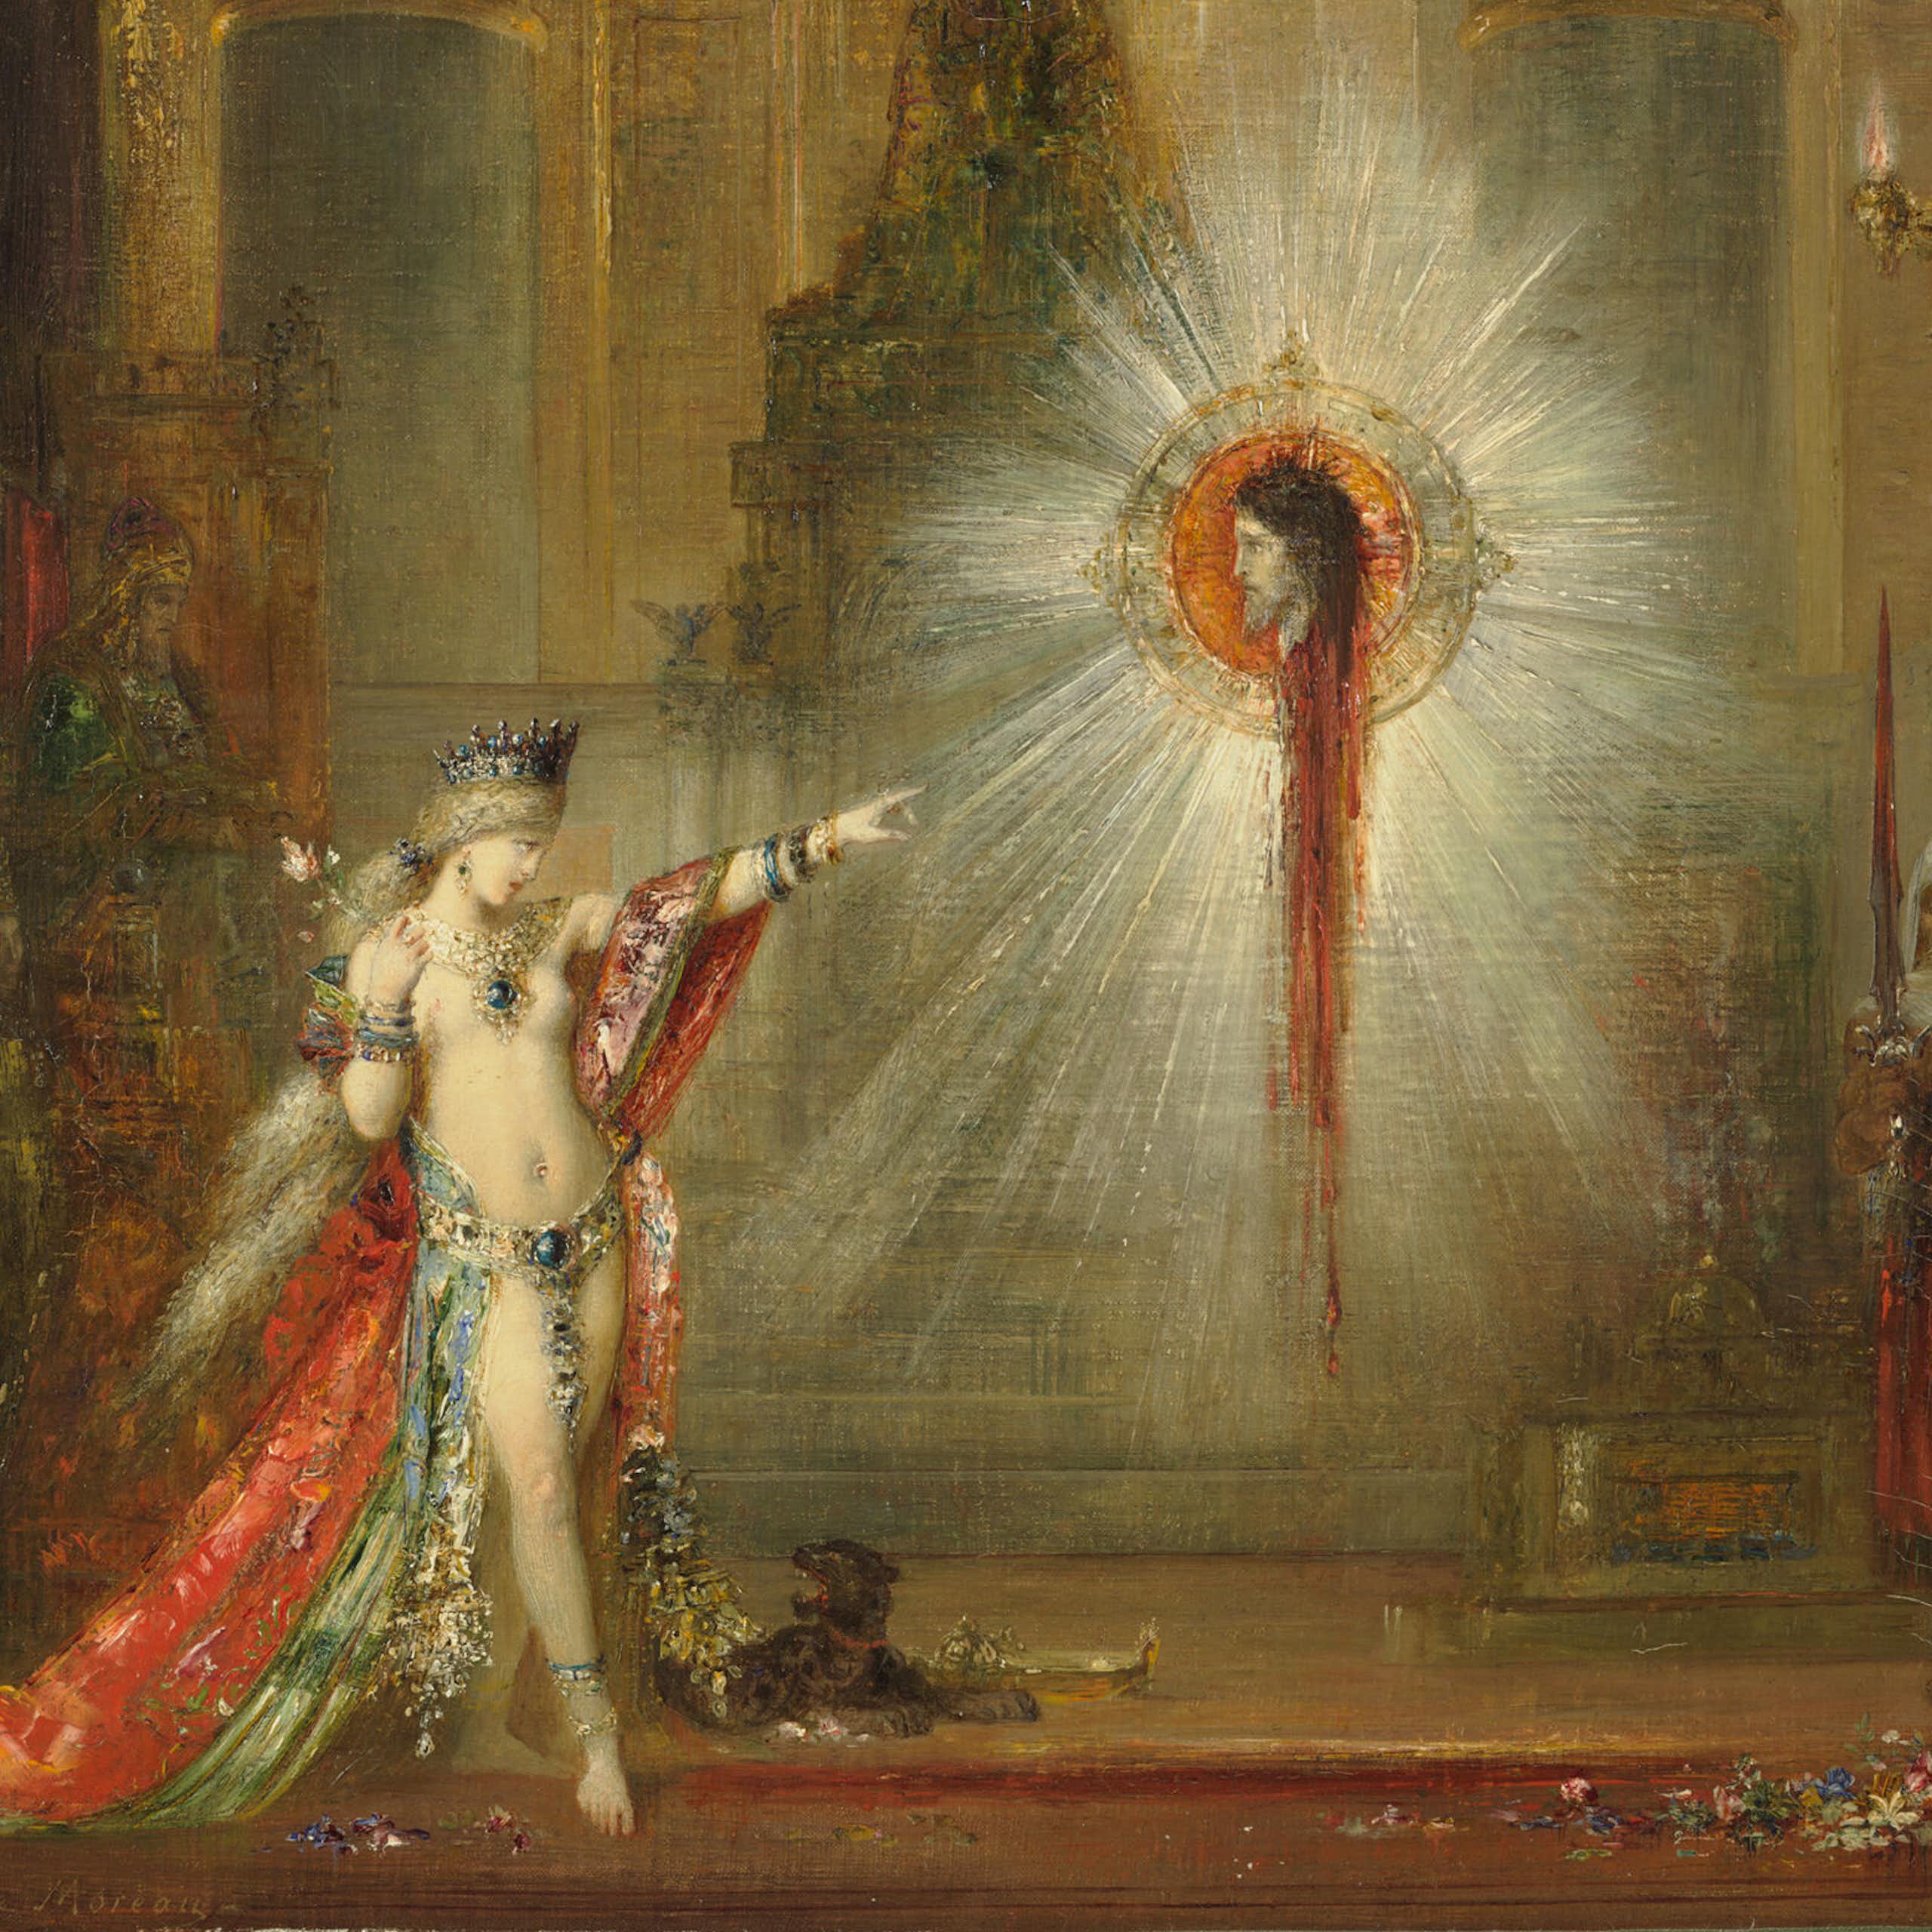 Oil painting. Salome dances in front of John The Baptist's head.